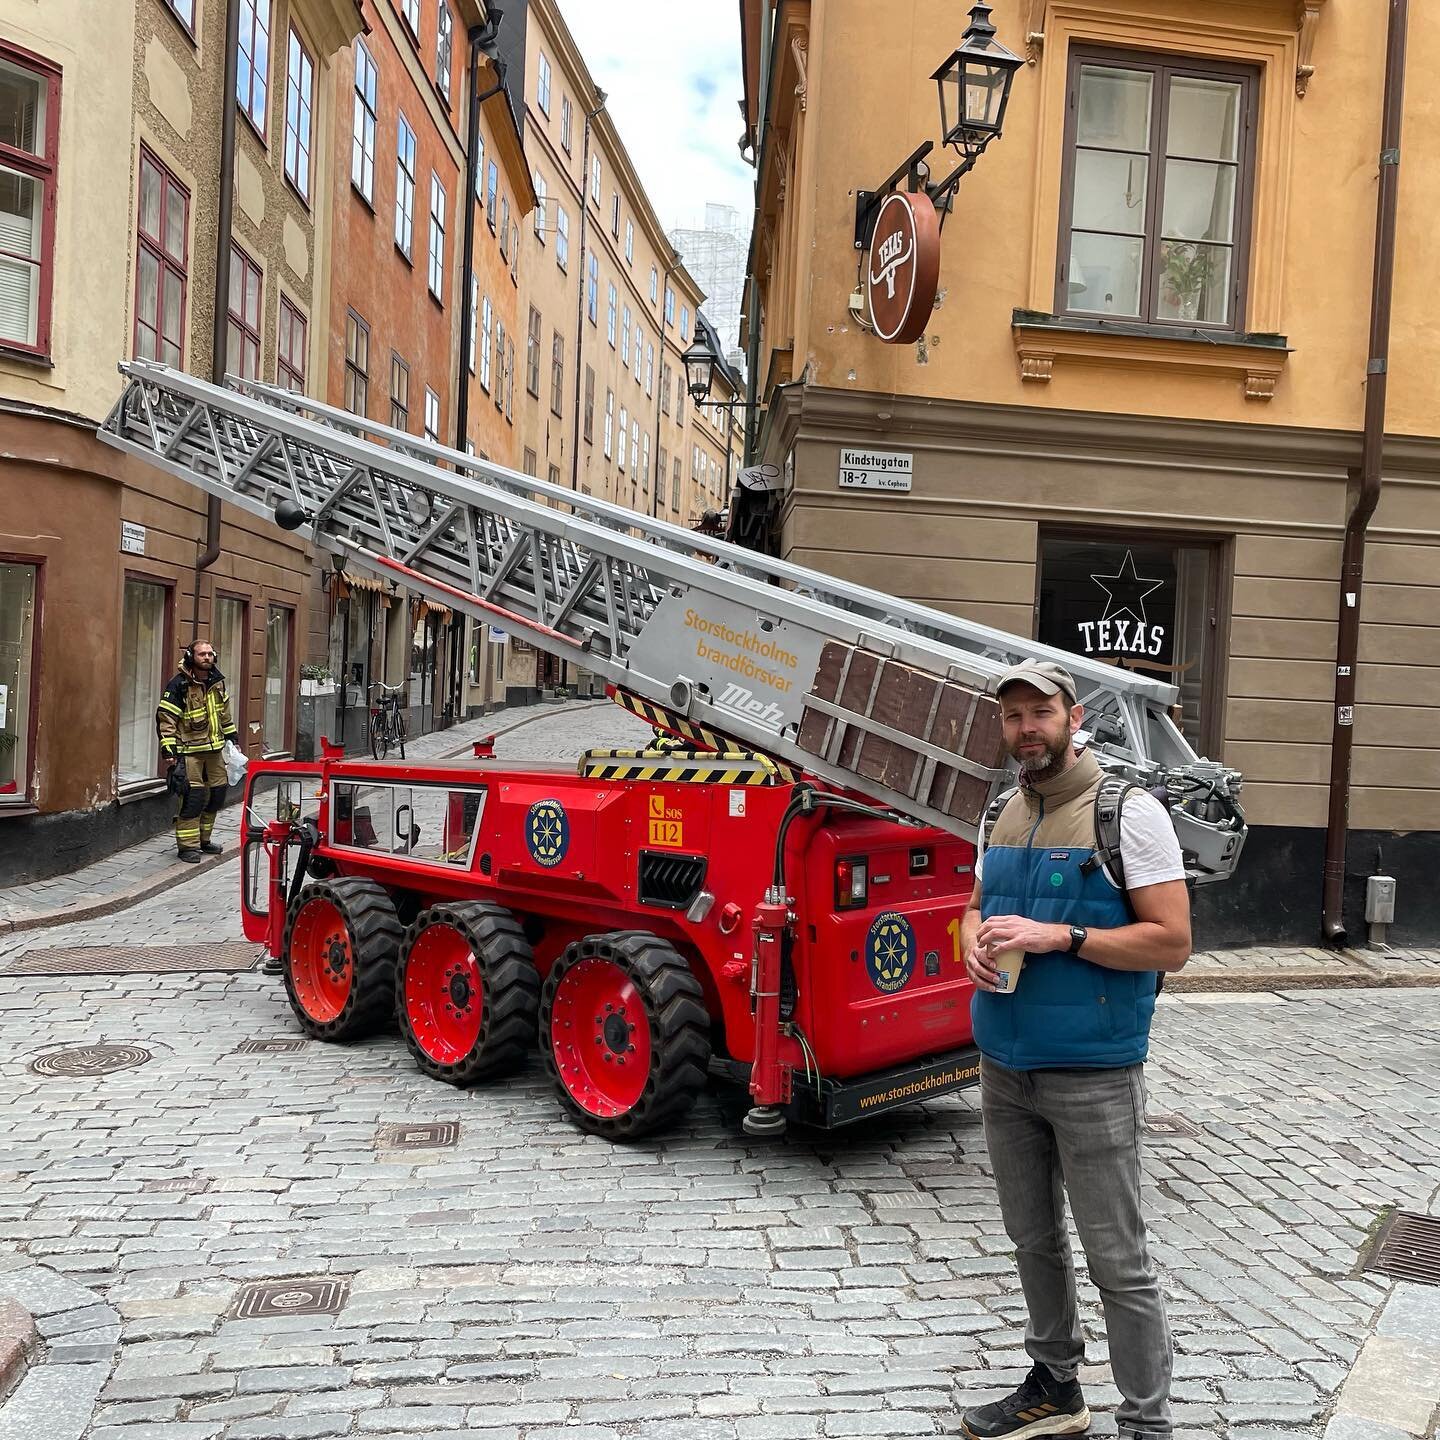 I had the pleasure of guiding London expert Jonnie Fielding through Stockholm. It was fun to exchange and compare the history of our cities.
Jonnie runs his own top rated guiding company in London www.bowlofchalk.net
Thanks Jonnie for sharing your kn